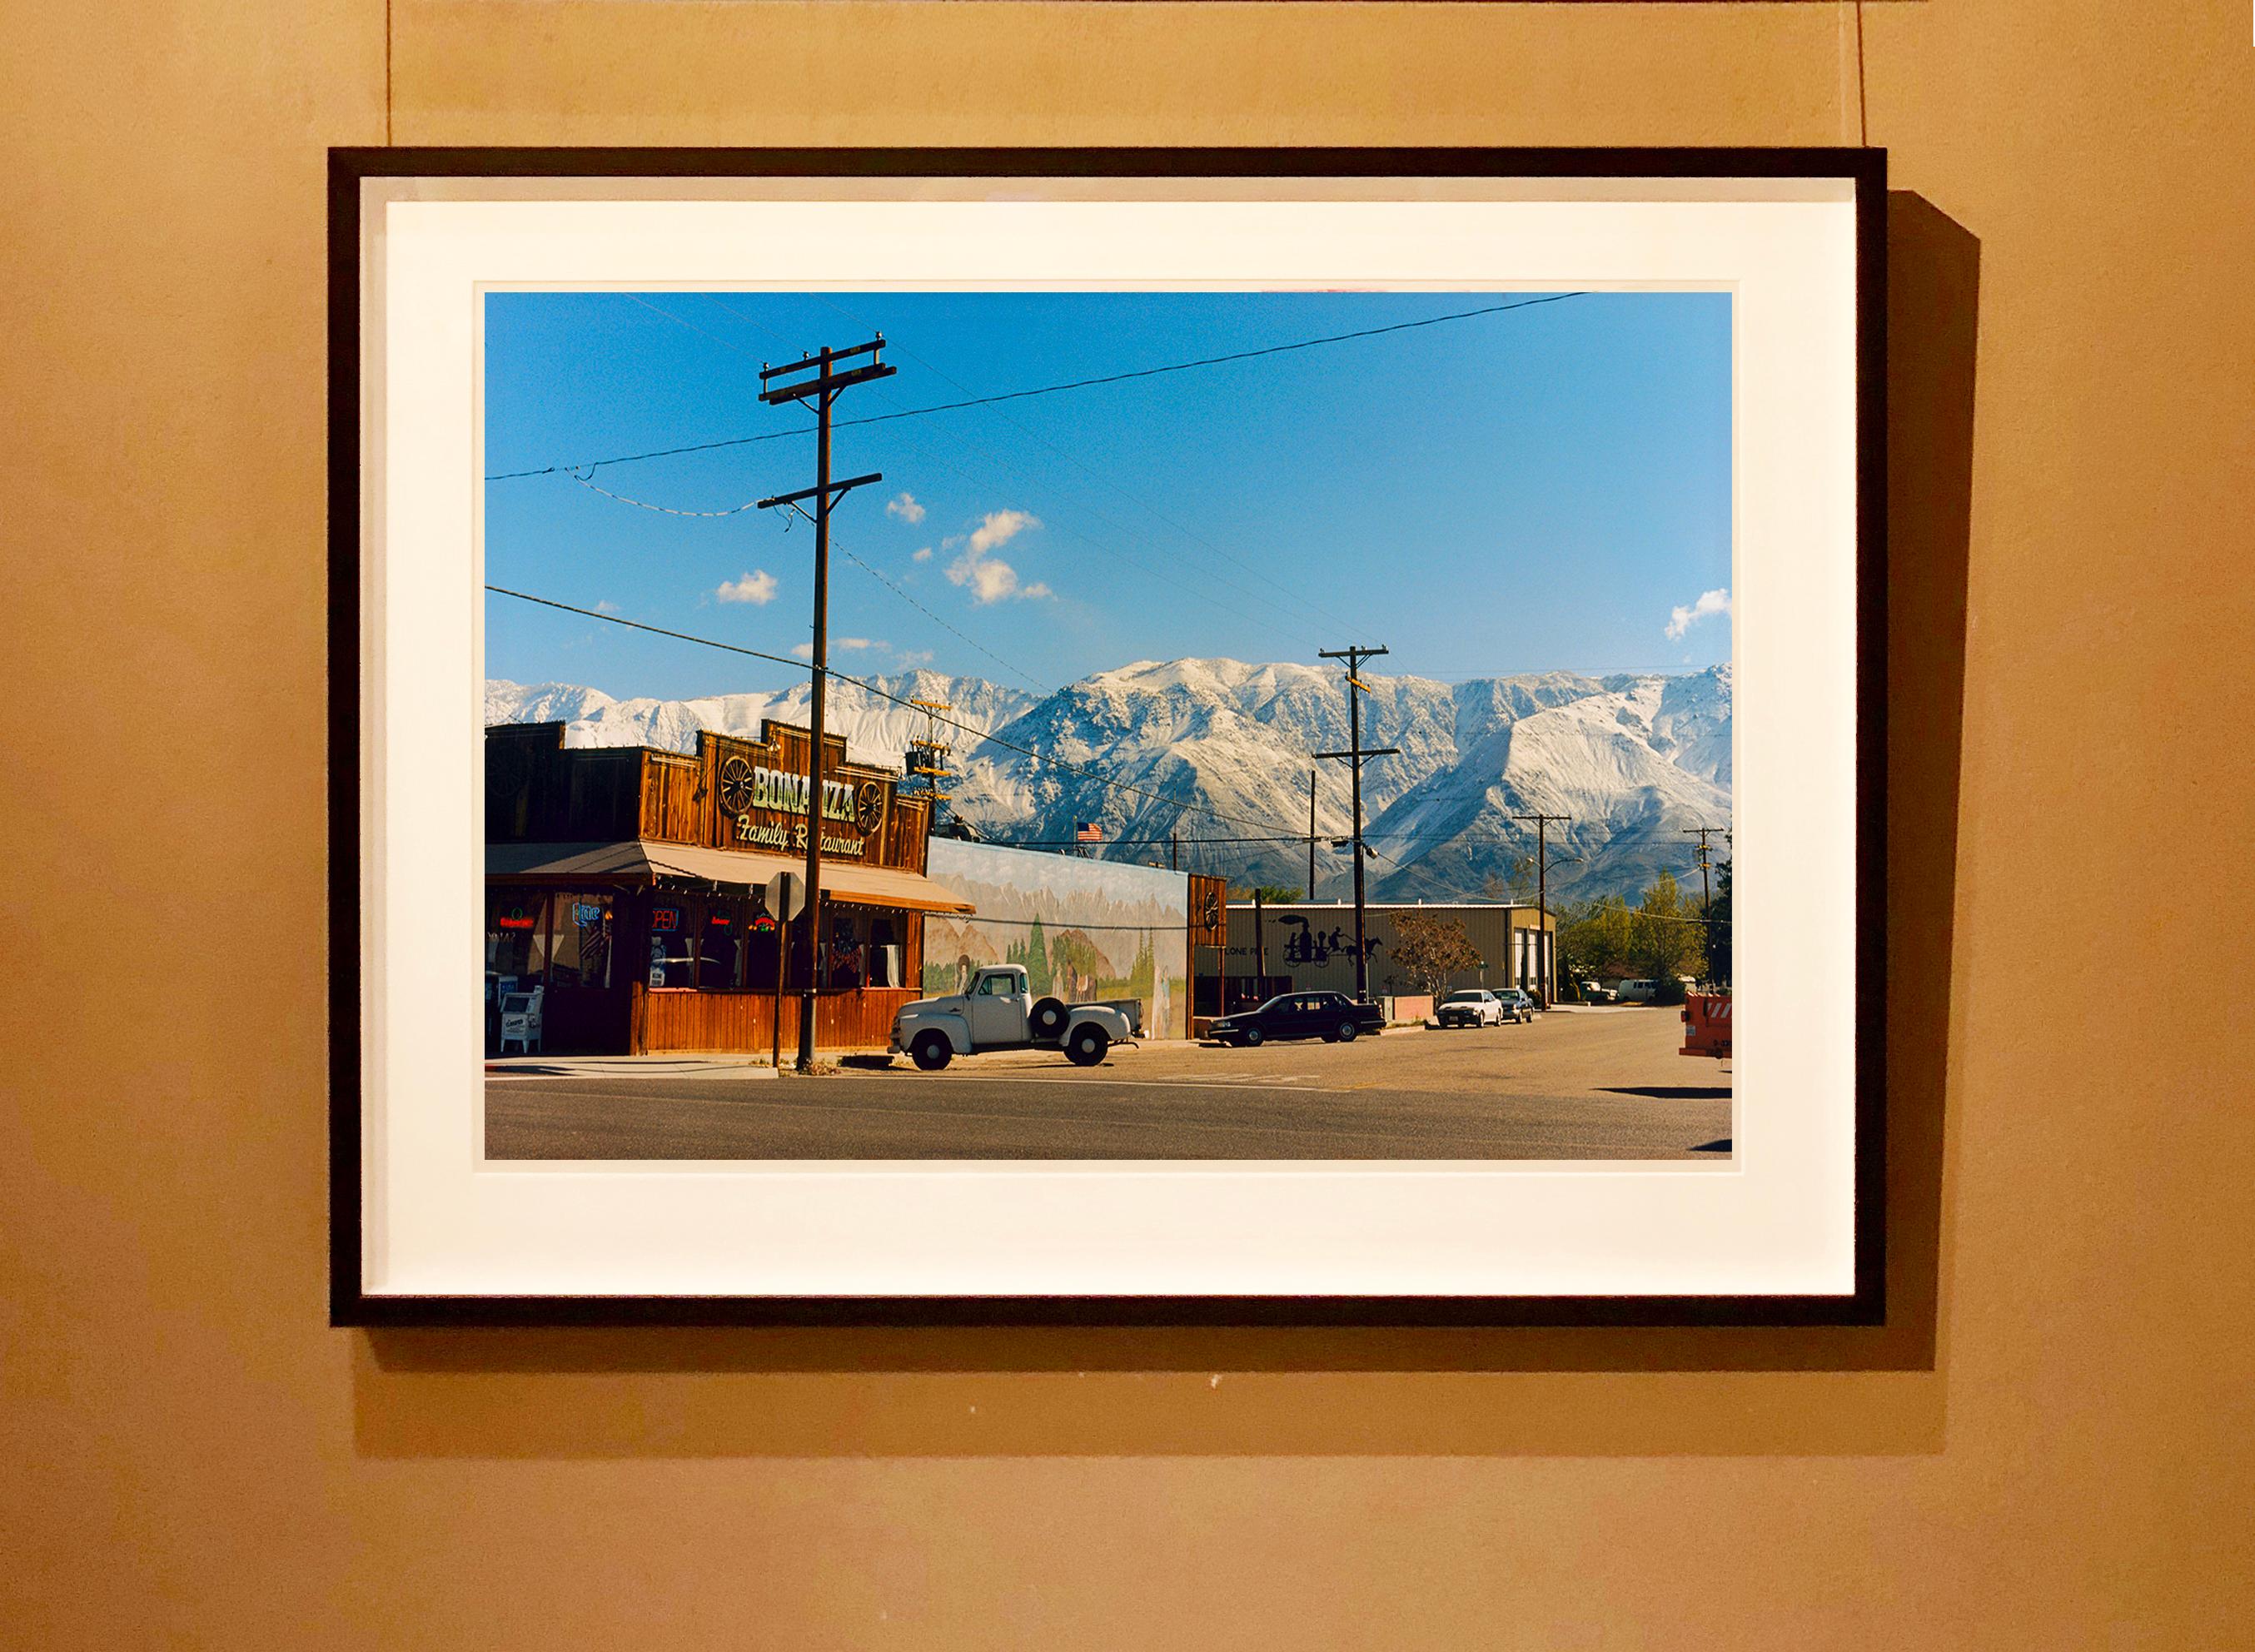 There is a cinematic style to this artwork, Lone Pine, taken in a former movie town in California, many Western films were made there. Taken outside Richard's iconic interior photograph 'Bonanza Café', set in the Owens Valley against a mountain